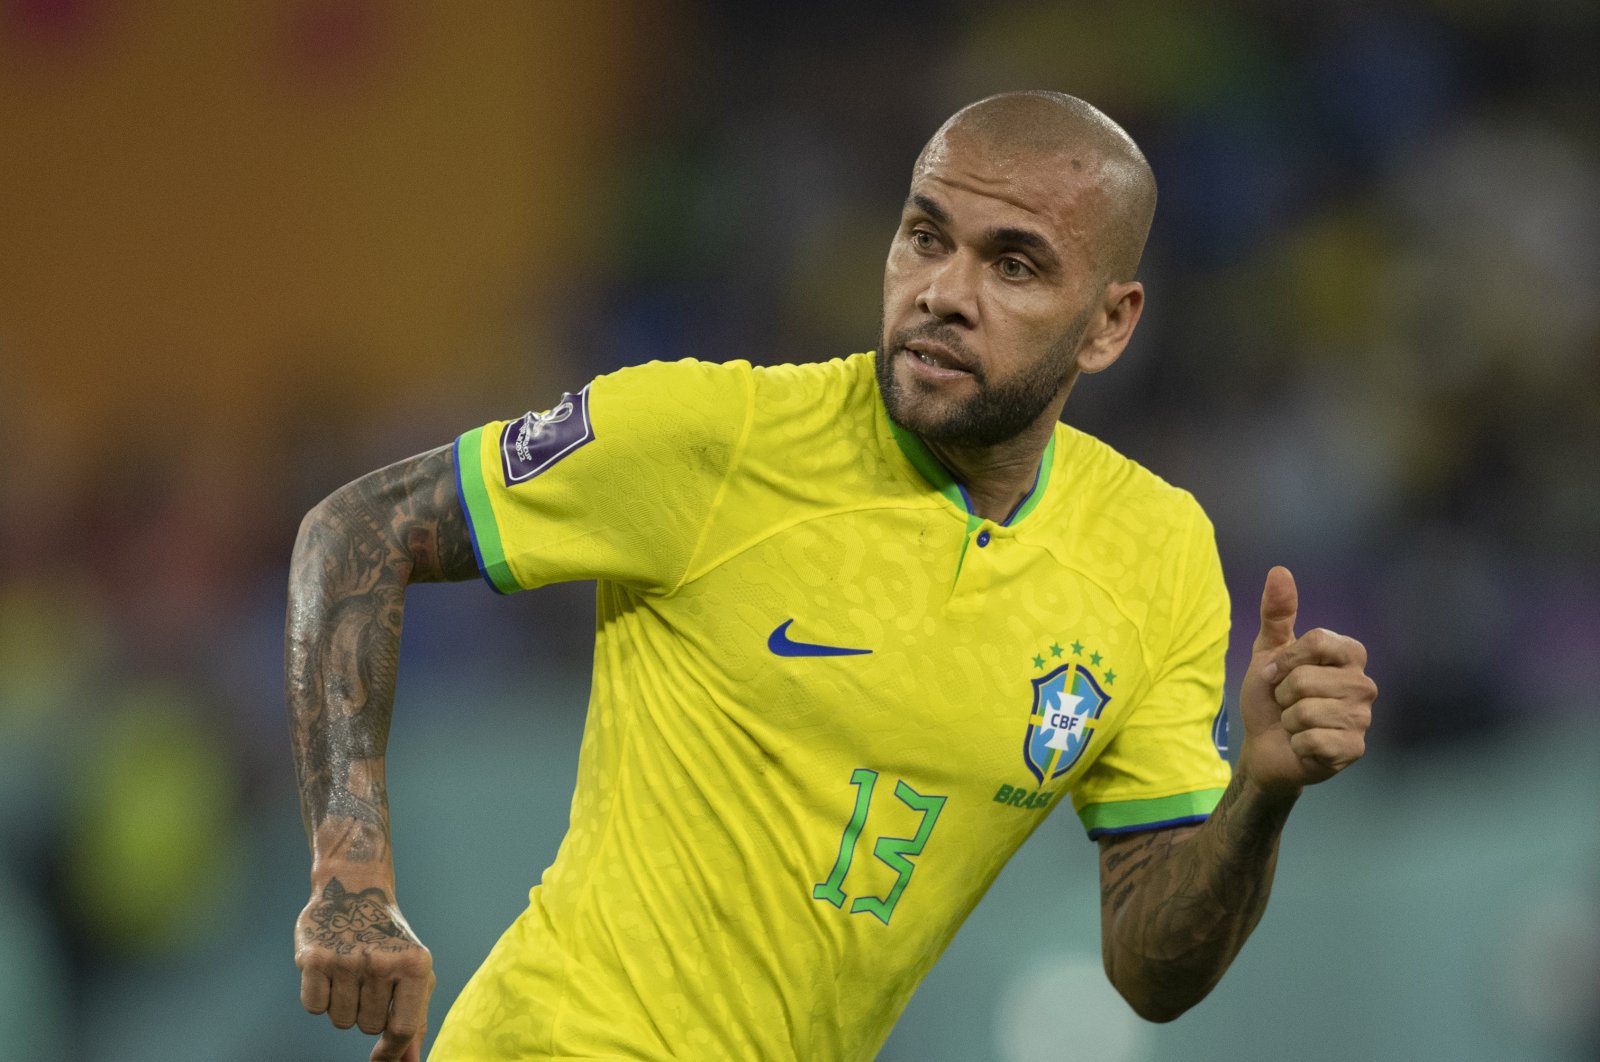 Brazil&#039;s Dani Alves in action during the FIFA World Cup Qatar 2022 Round of 16 match against South Korea at Stadium 974, Doha, Qatar, Dec. 5, 2022. (Getty Images Photo)